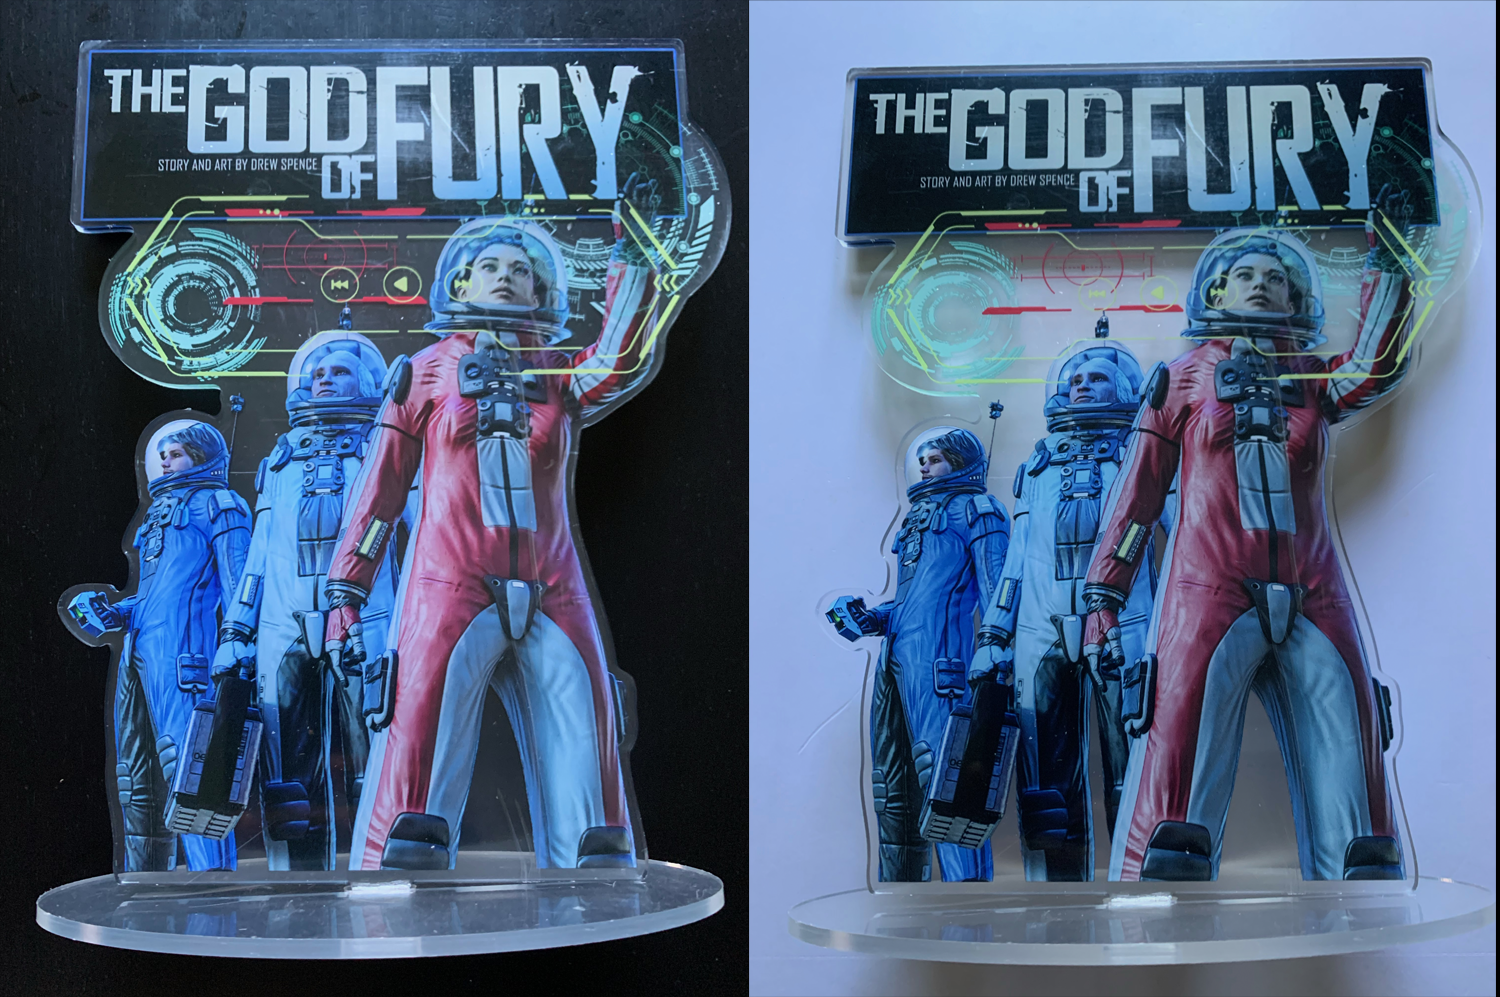 The God of Fury standee